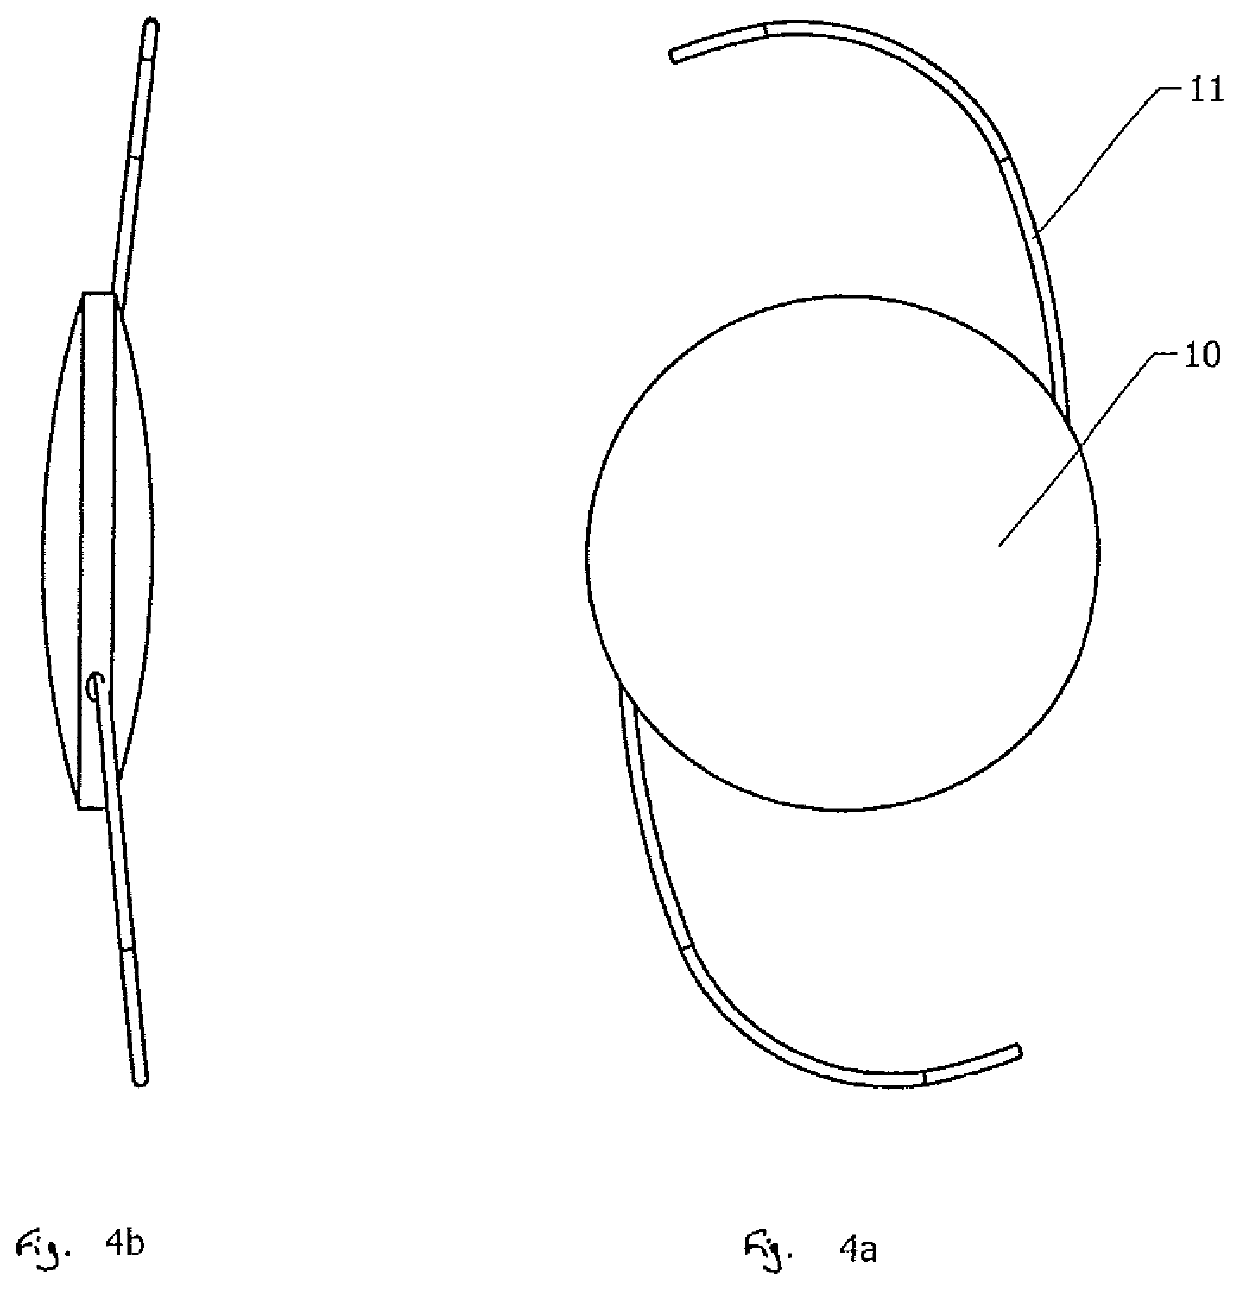 Self-centering phakic refractive lenses with parachute design